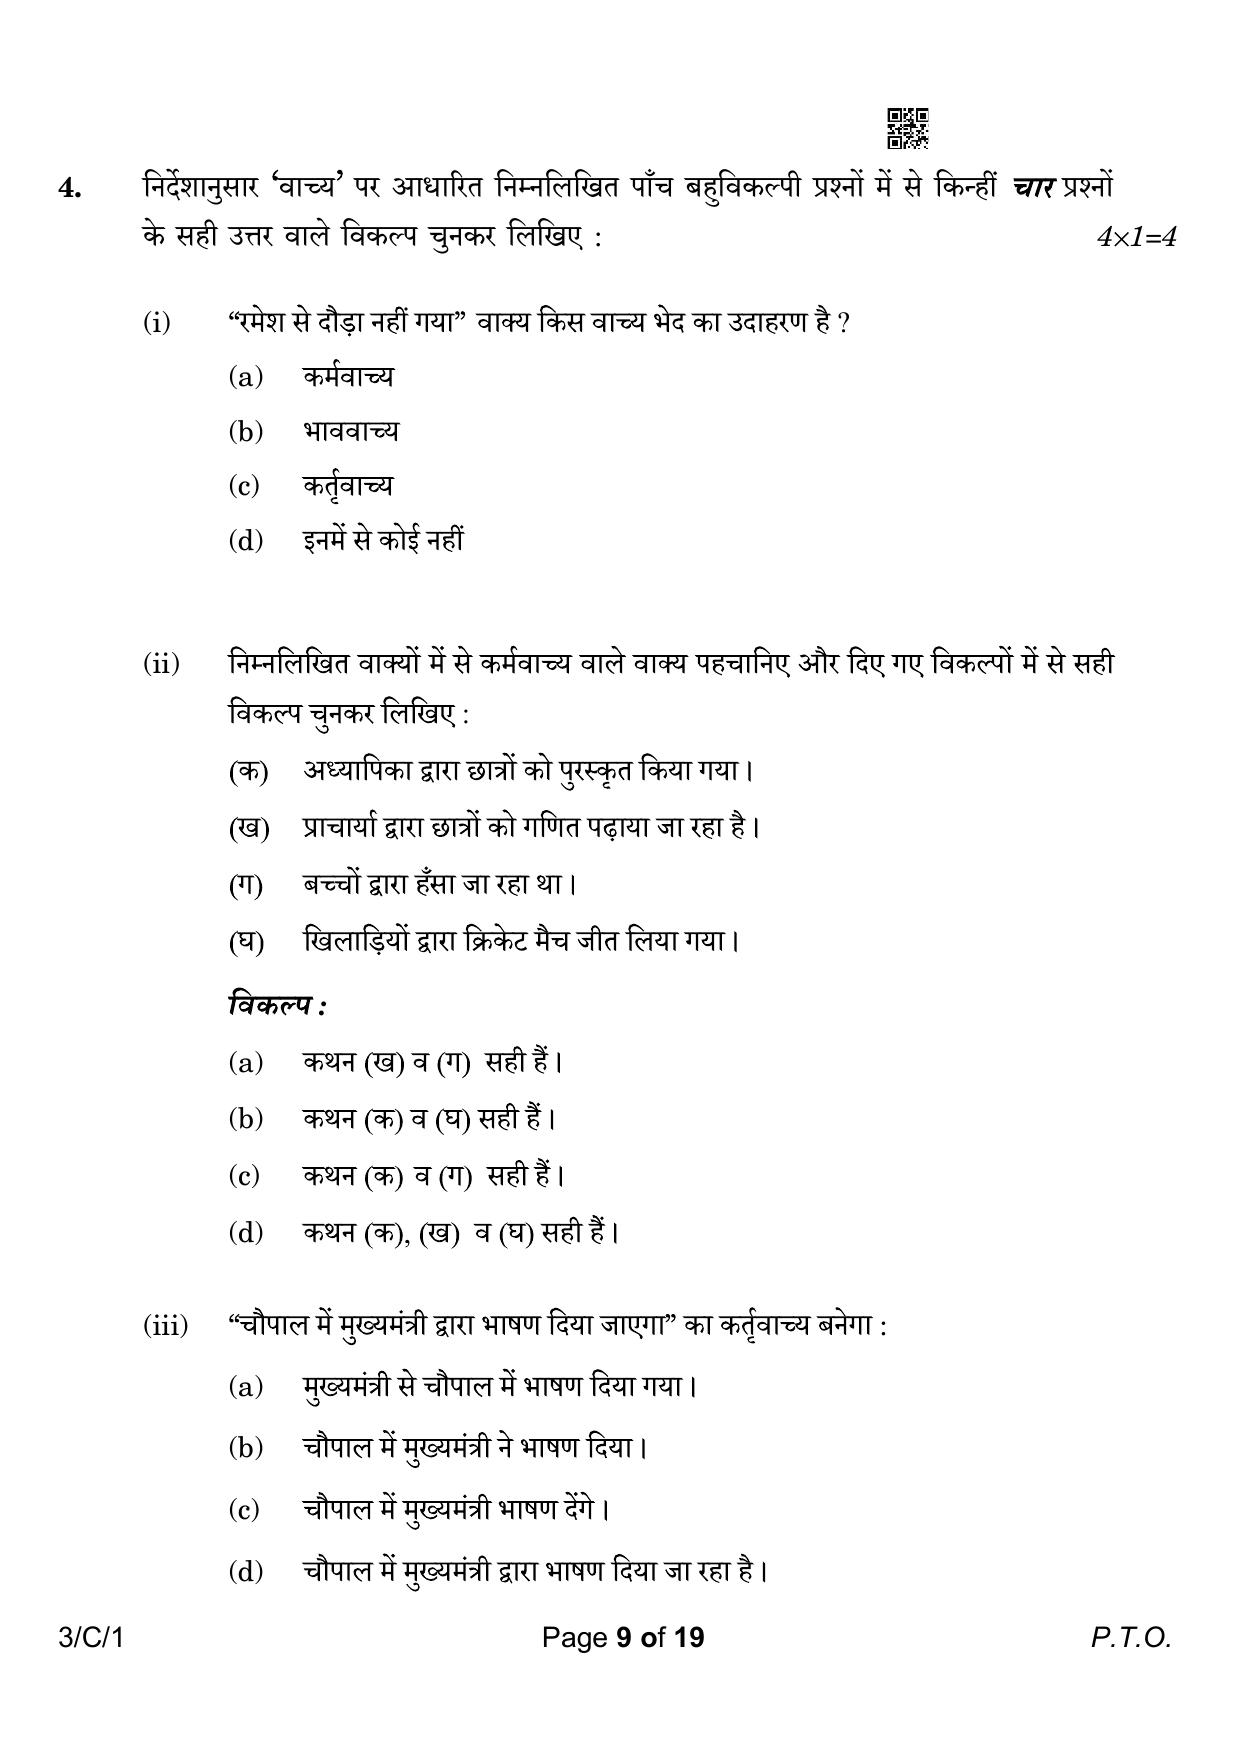 CBSE Class 10 3-1 Hindi A 2023 (Compartment) Question Paper - Page 9